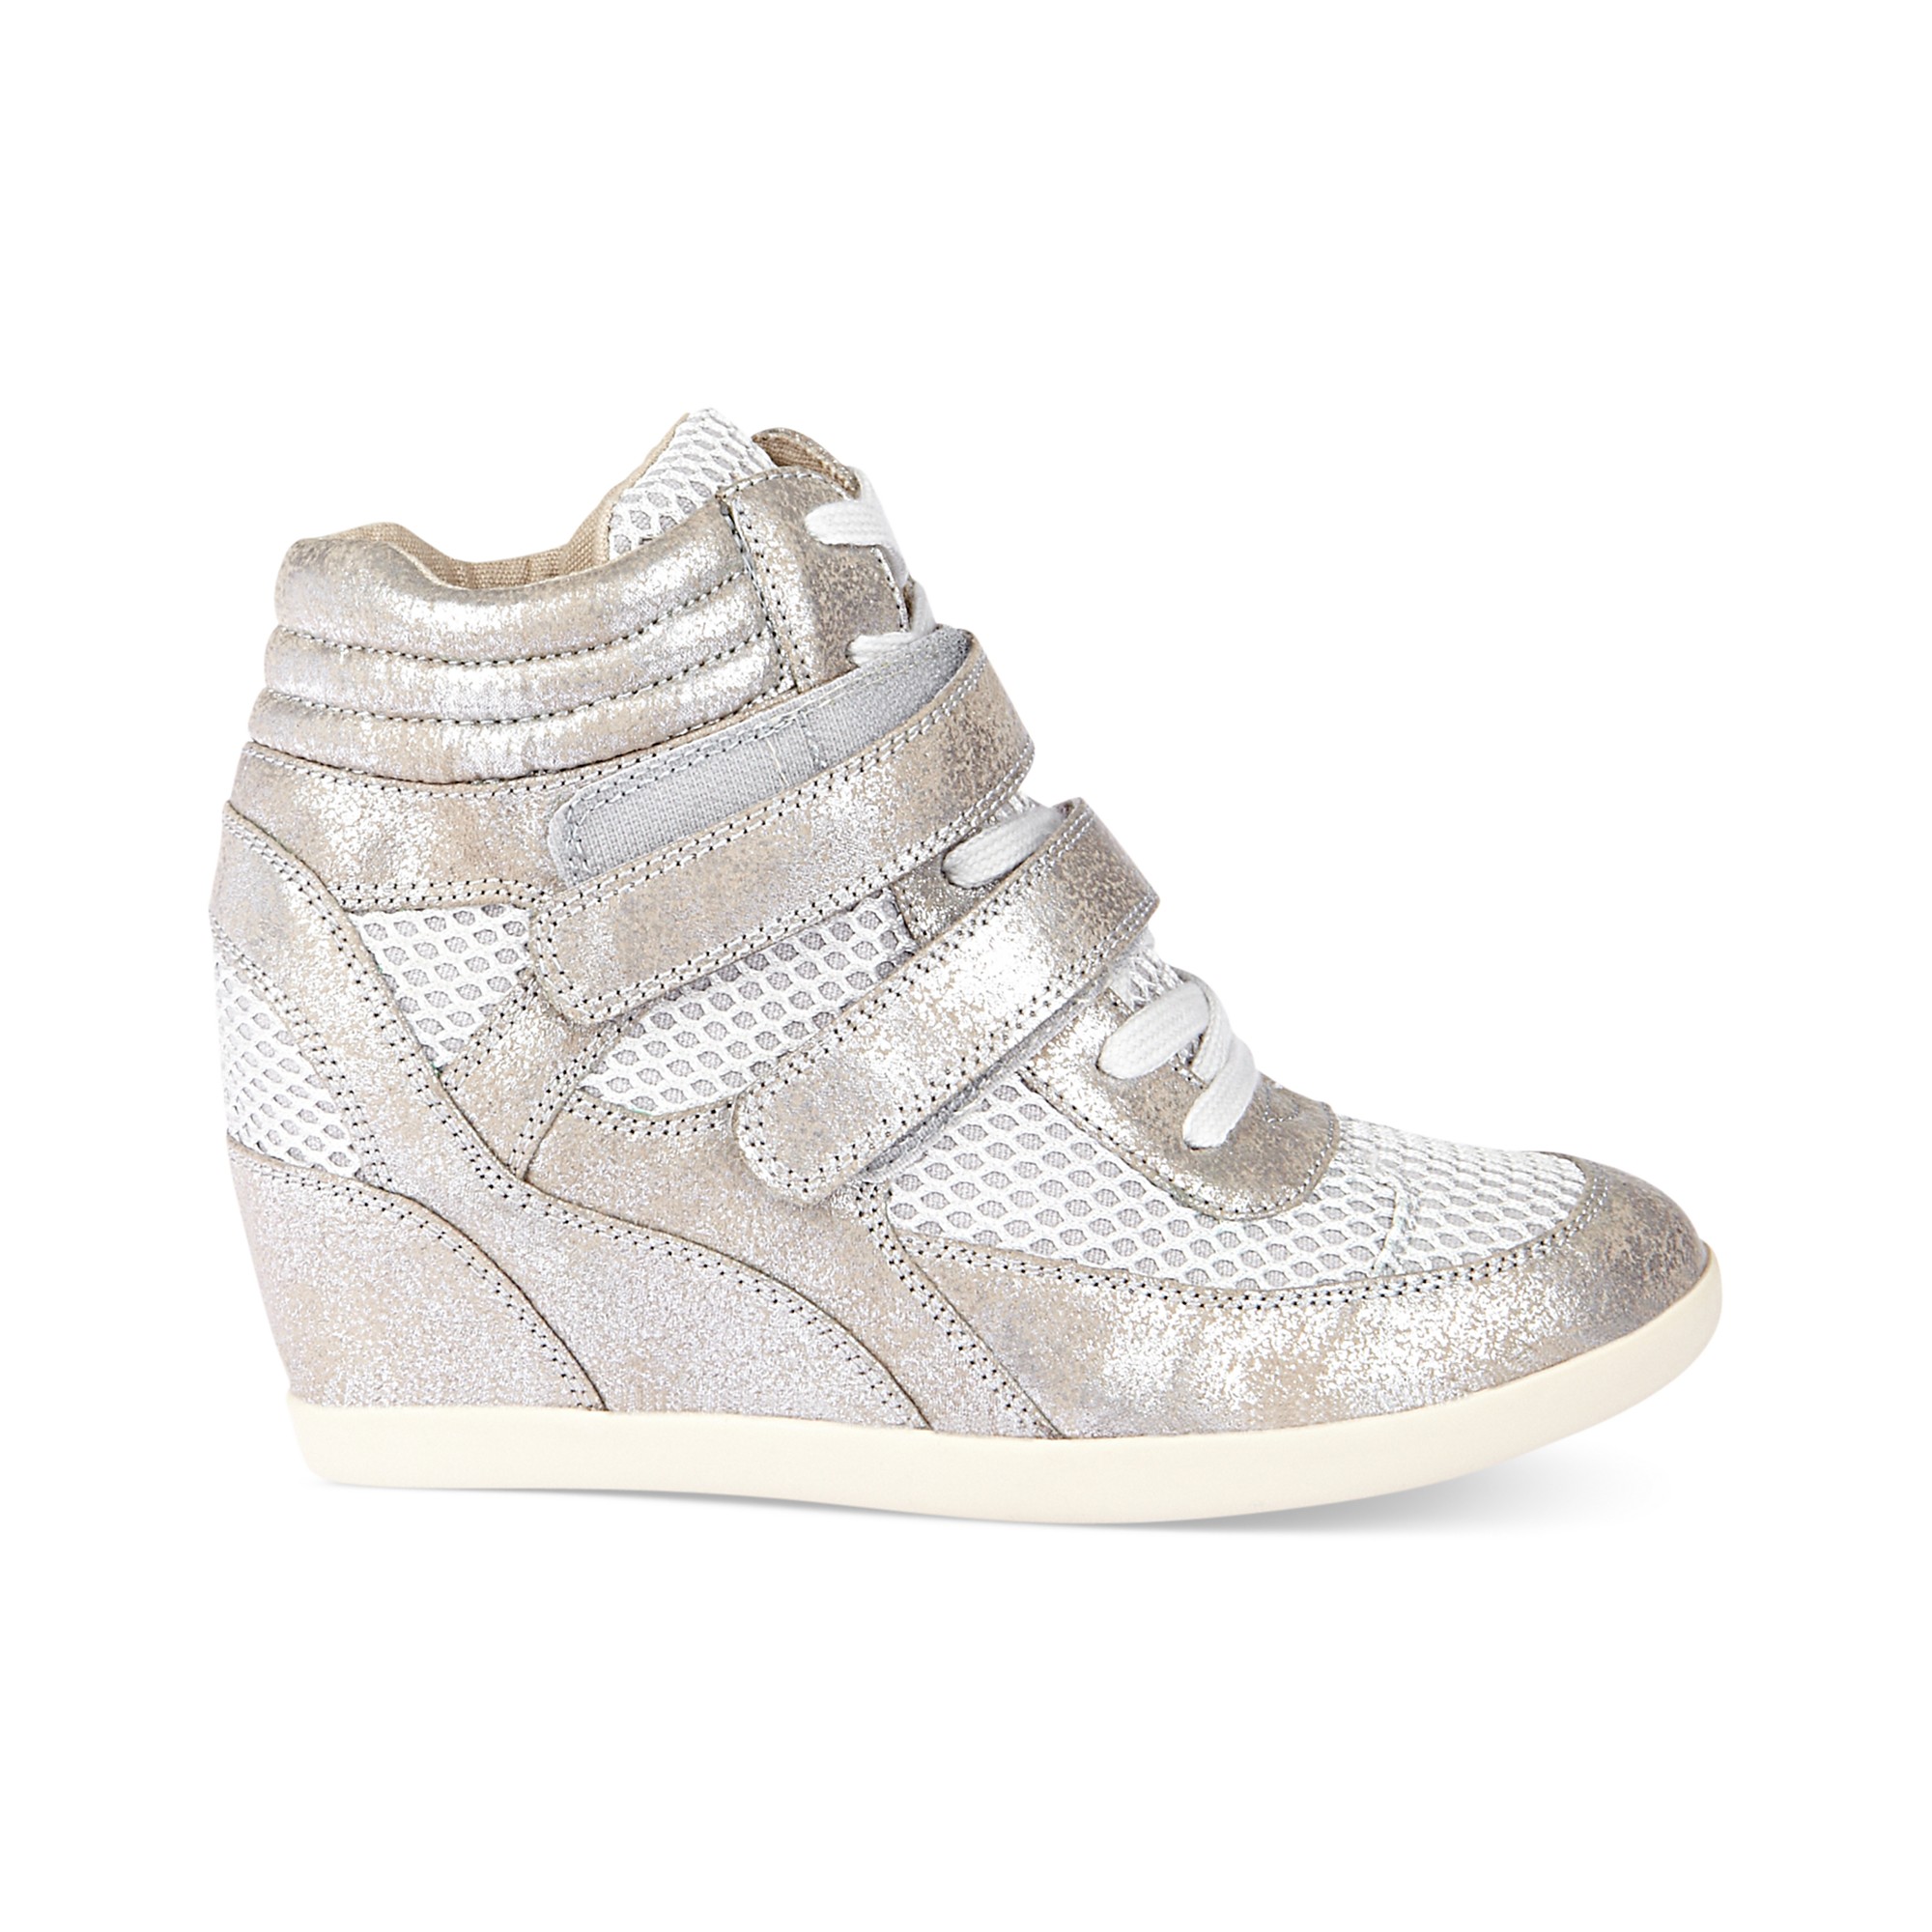 Lyst - Madden Girl Hickory Wedge Sneakers in Black